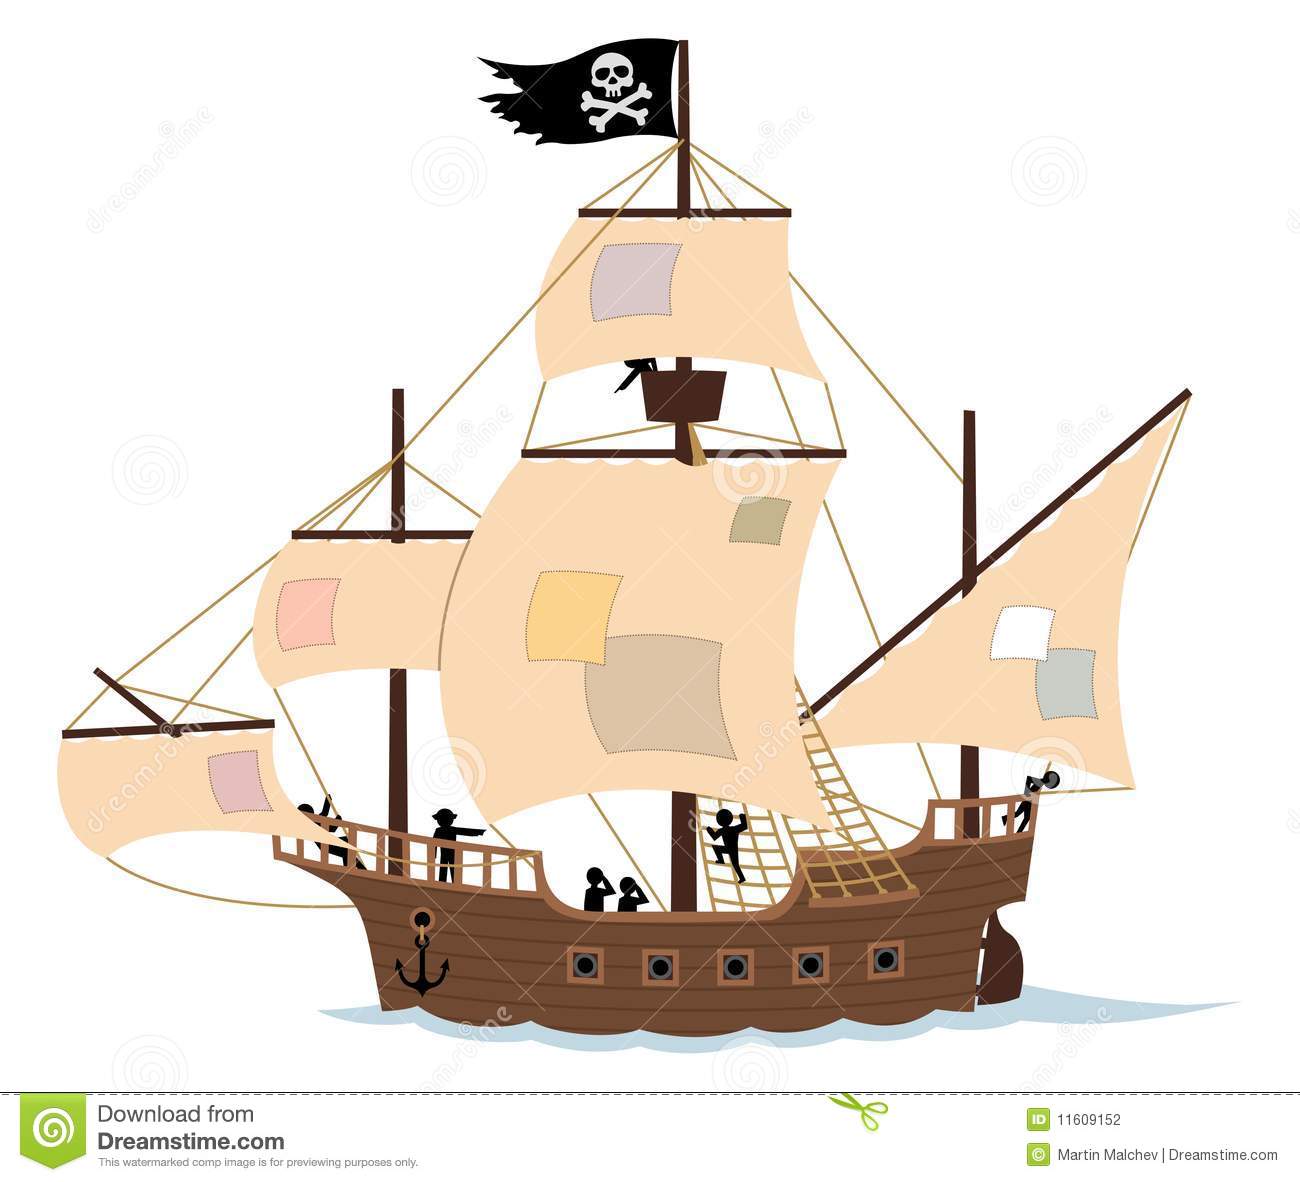     And You Get An Ordinary Sail Ship  No Transparency And Gradients Used